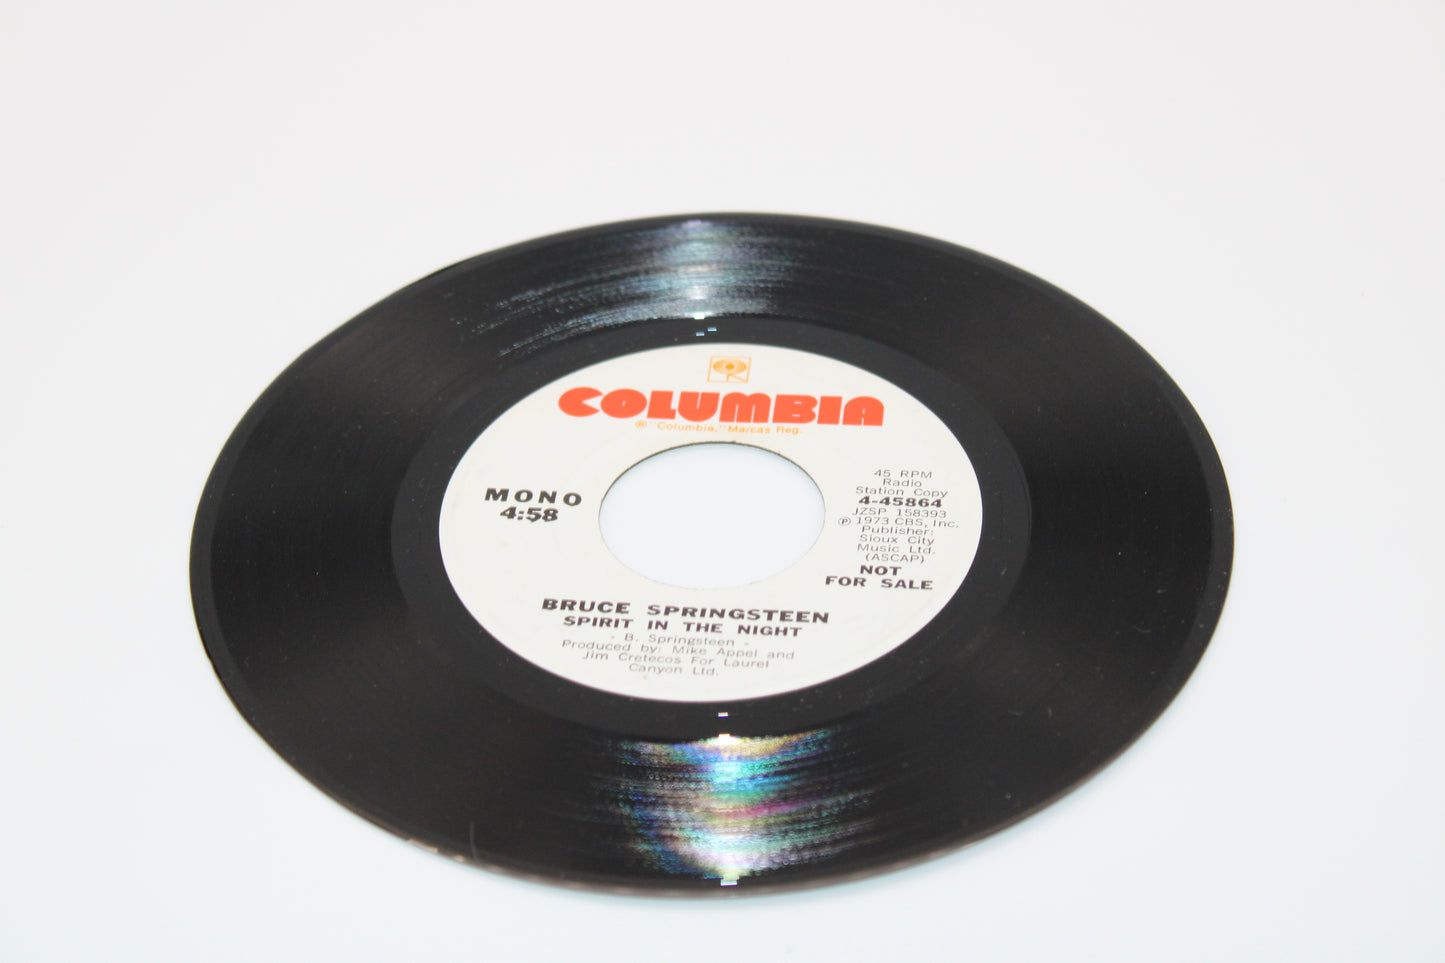 Bruce Springsteen 45 record "RADIO STATION COPY" Demo - Spirit in the Night - 1973 Collectible